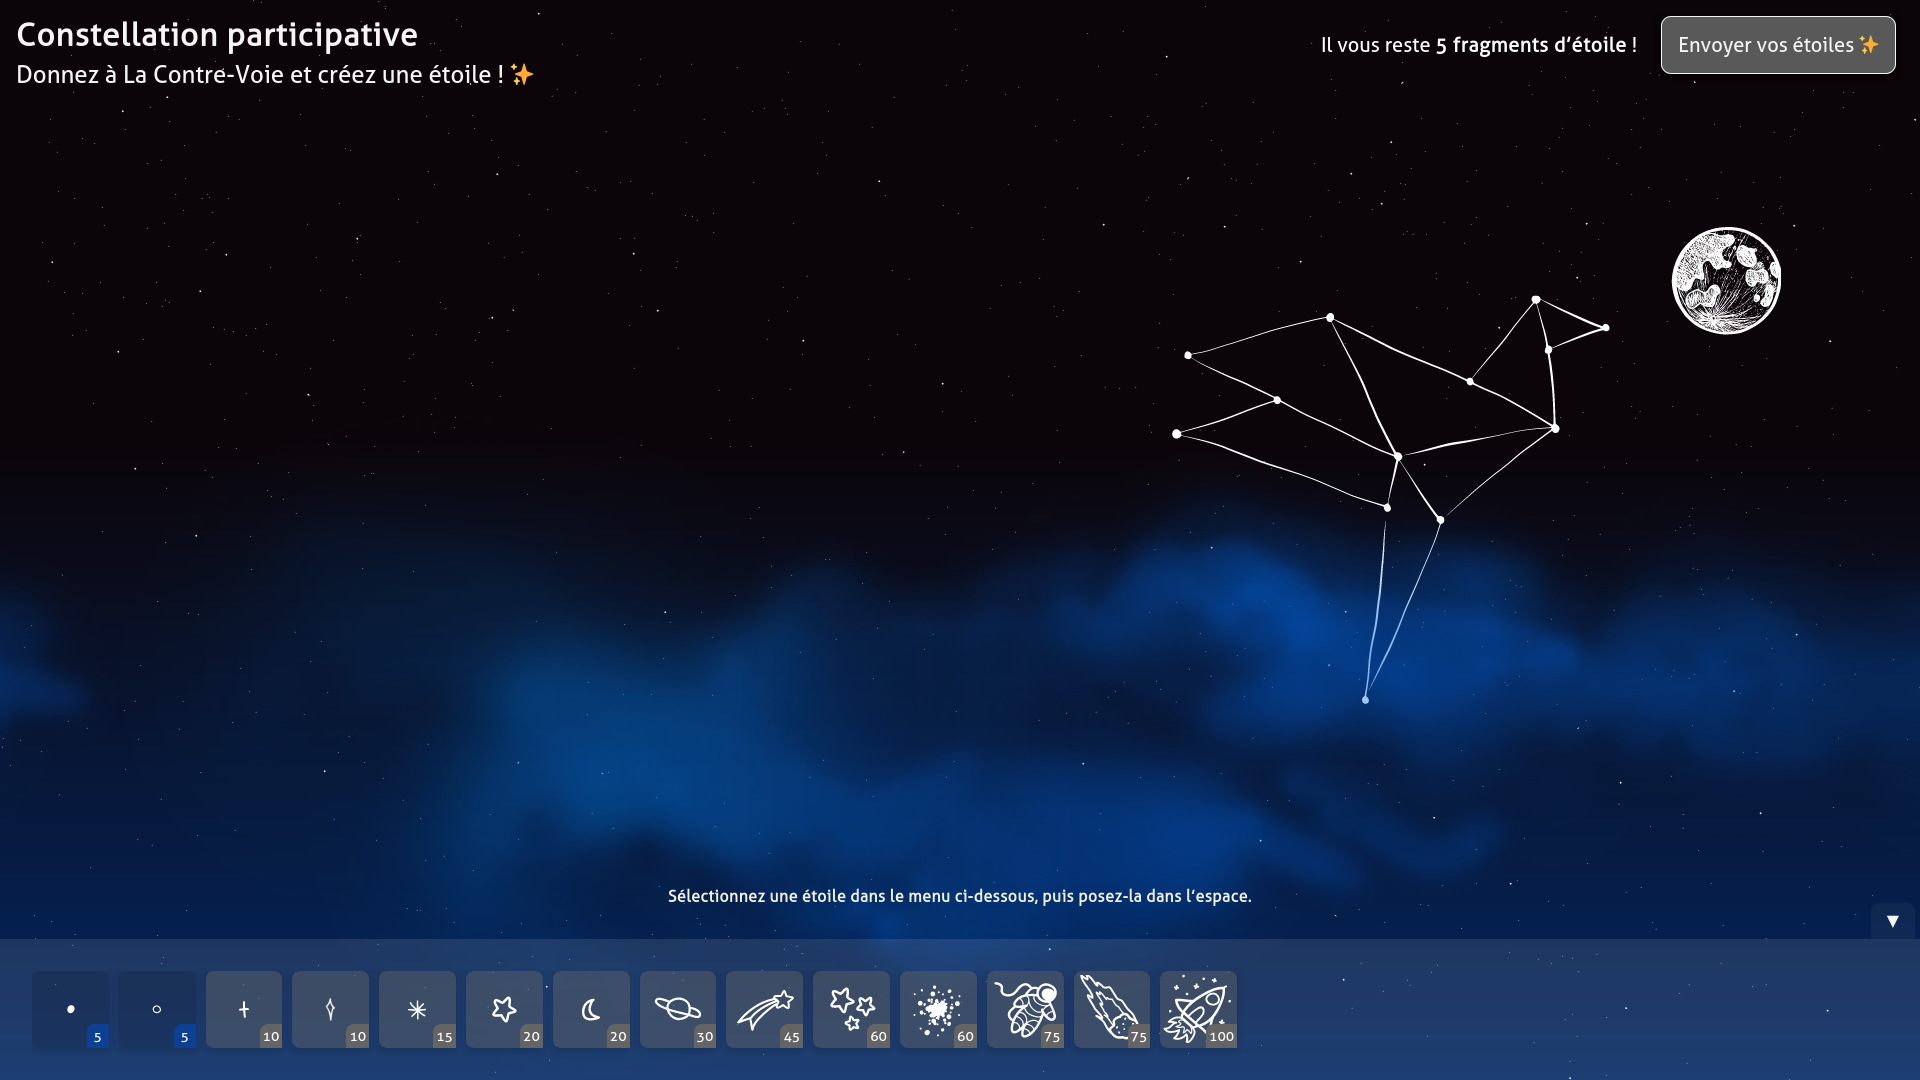 Screenshot of our participative constellation